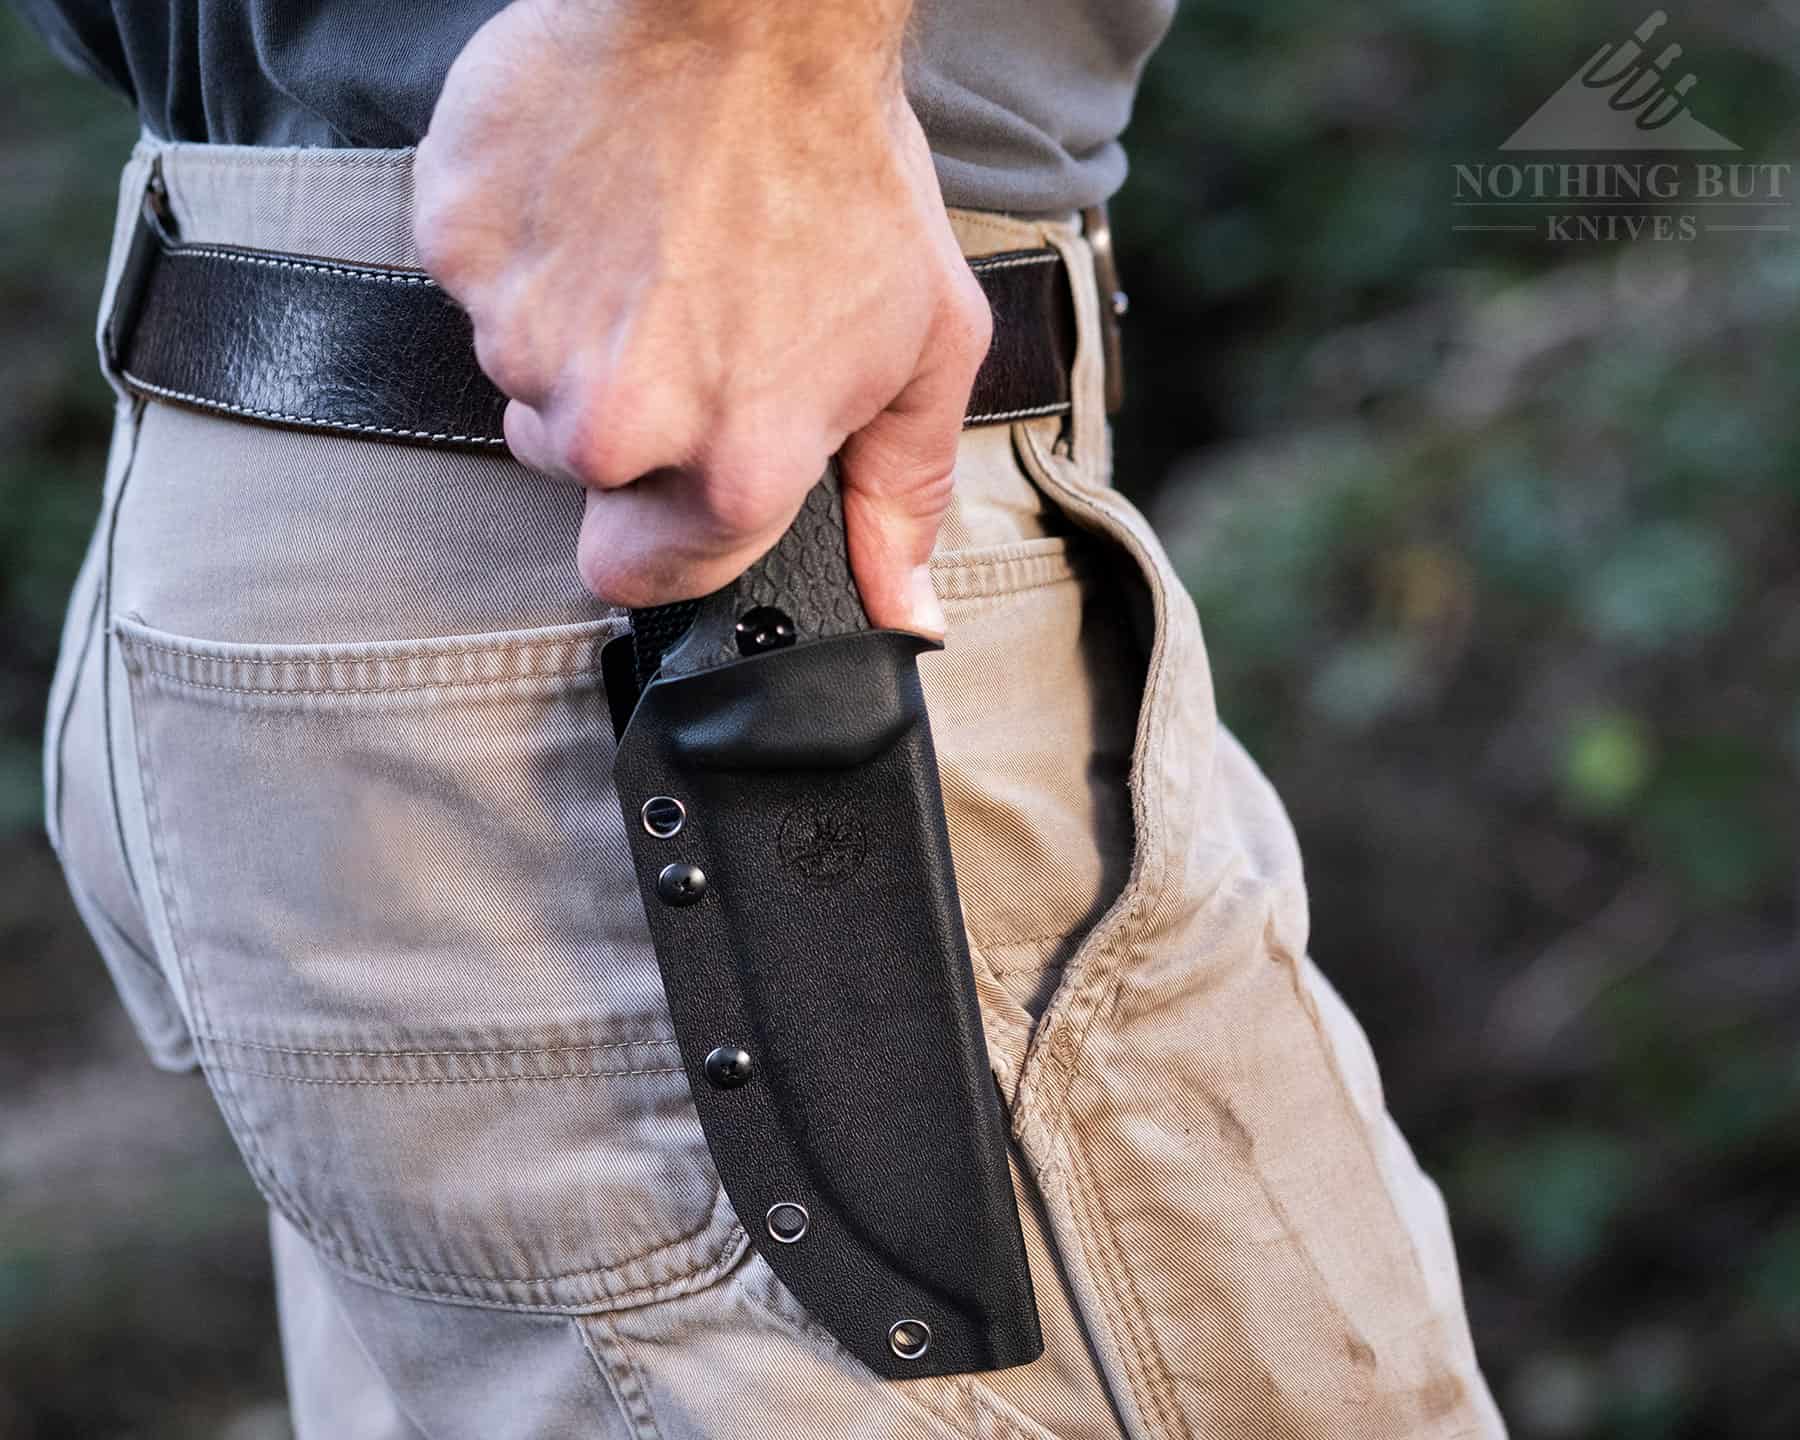 The thumb ramp on the Tracker-X2 sheath is a welcome upgrade. 